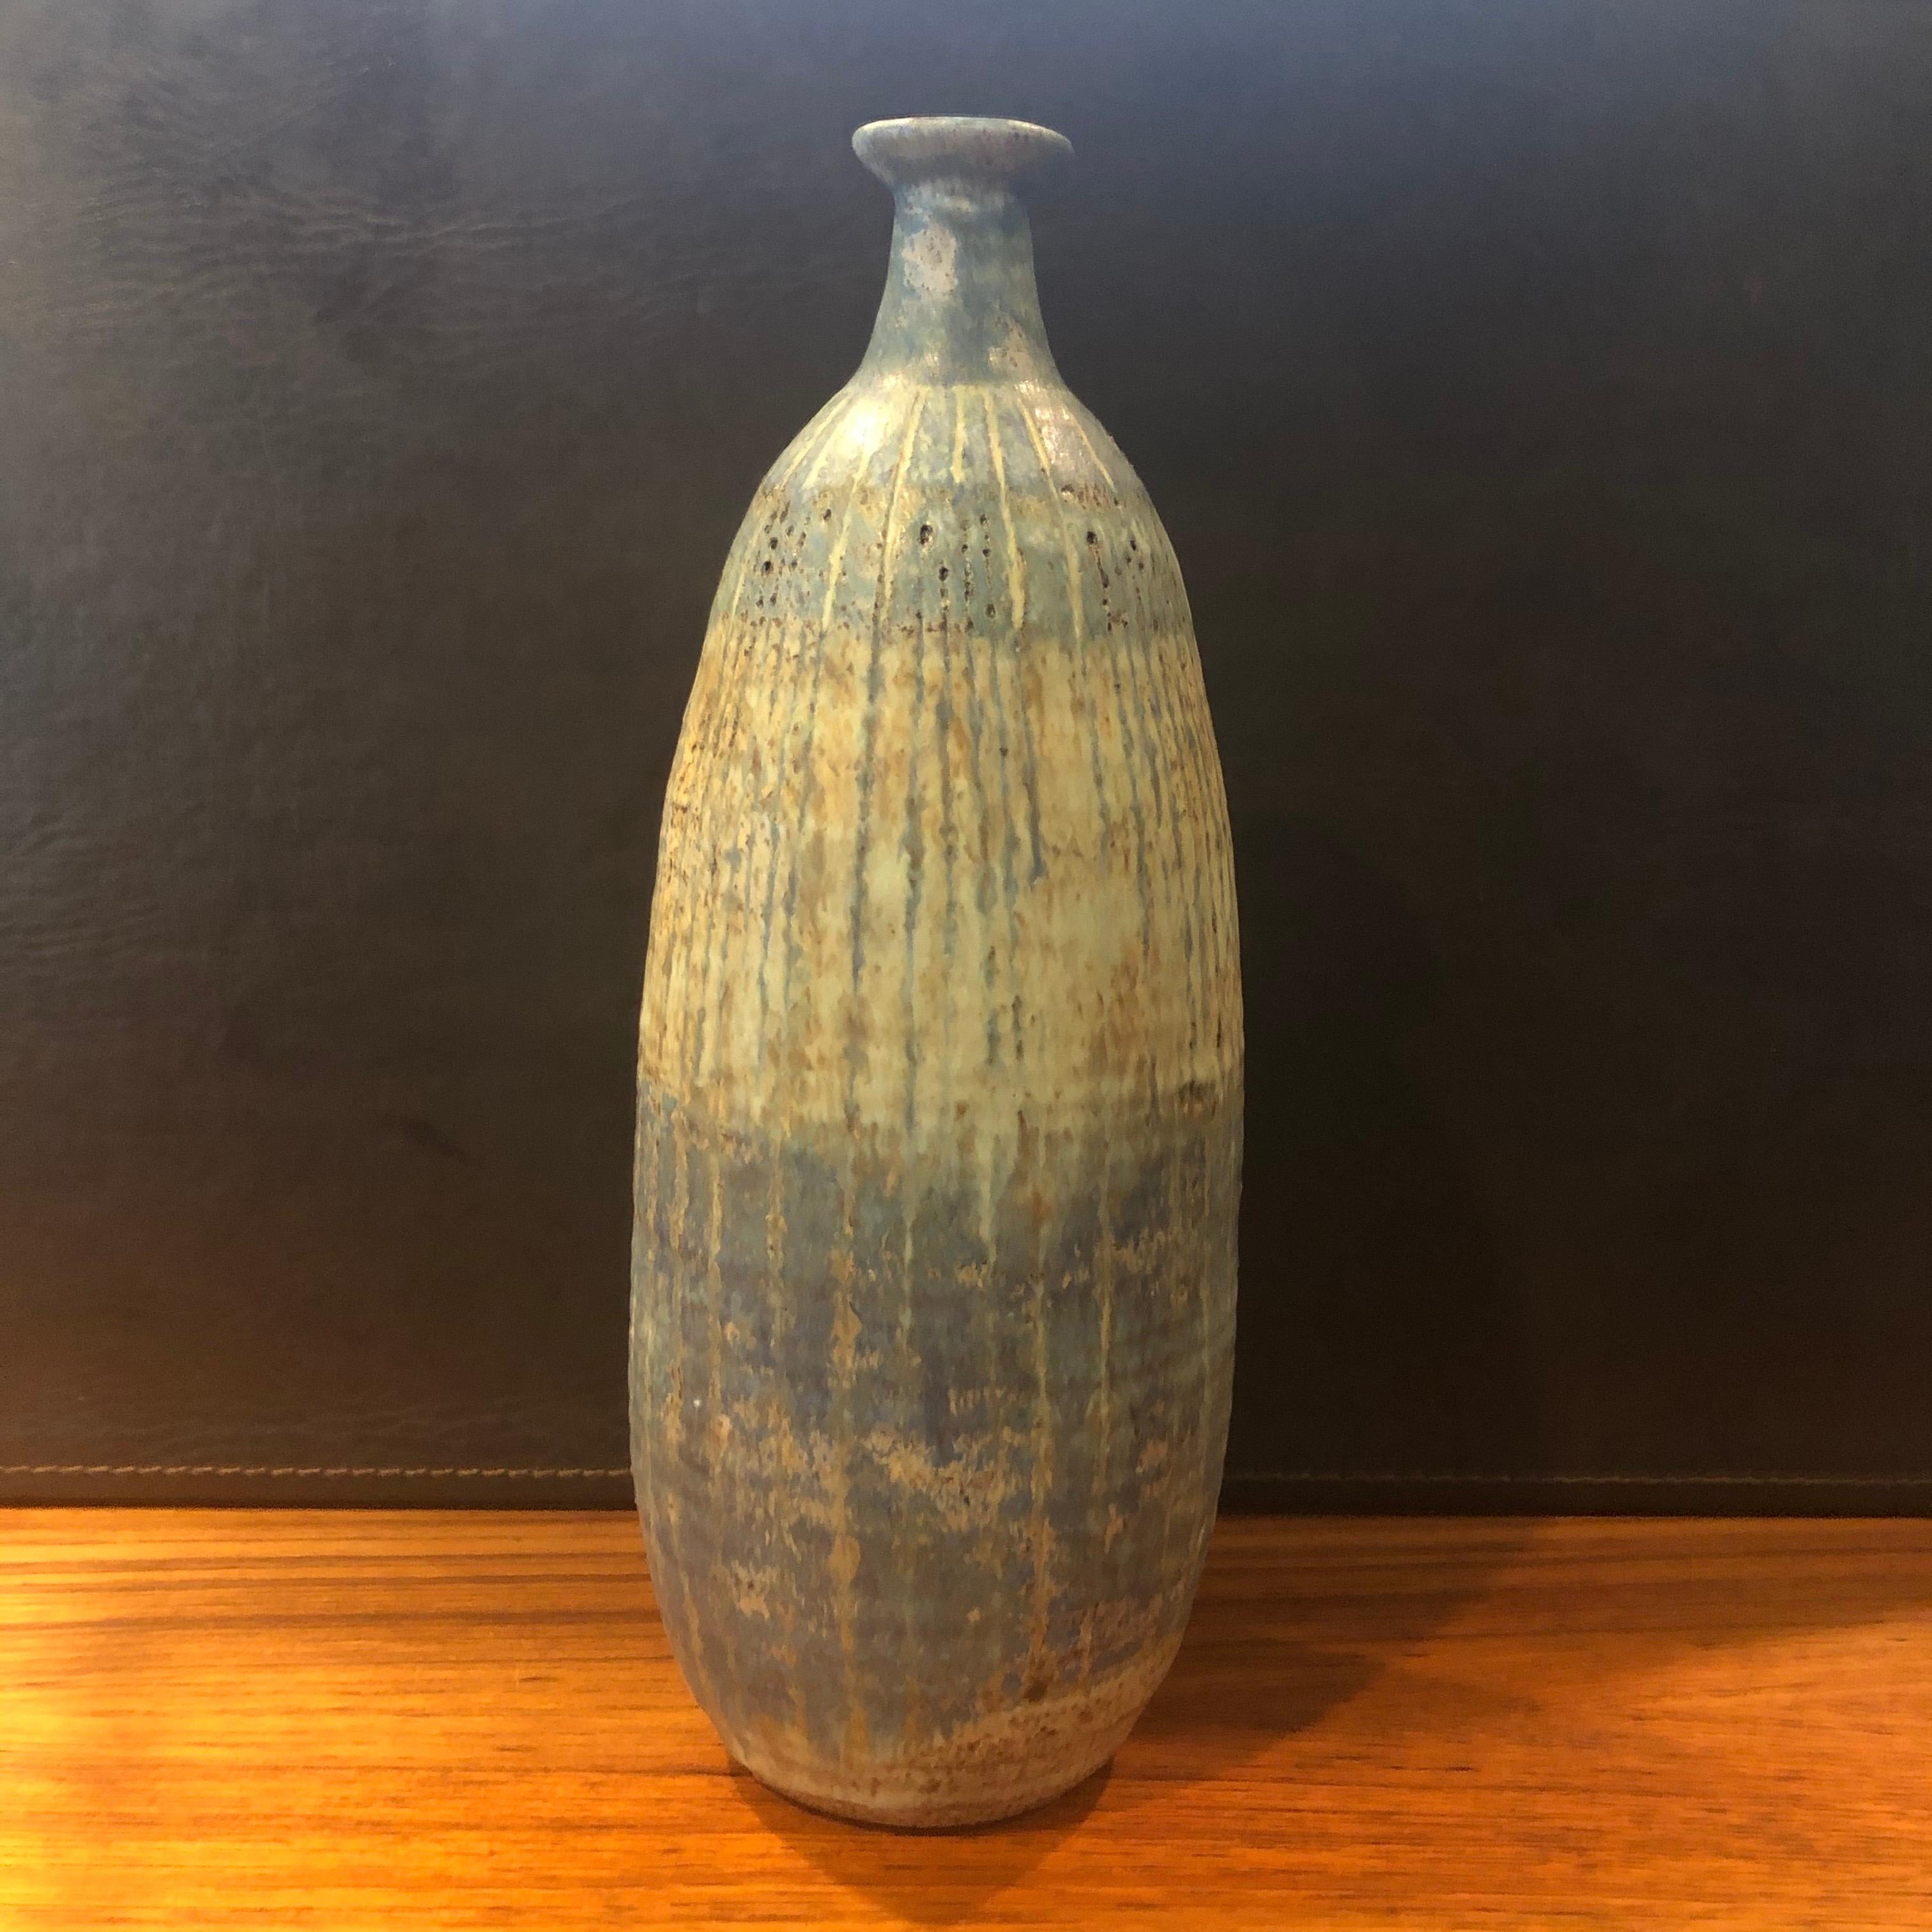 A very nice California studio pottery ceramic vase with beautiful blue, tan and brown earth tones by Helen Noel Shagam, circa 1963. The vessel has a wonderful design, look and form. #1244.

 